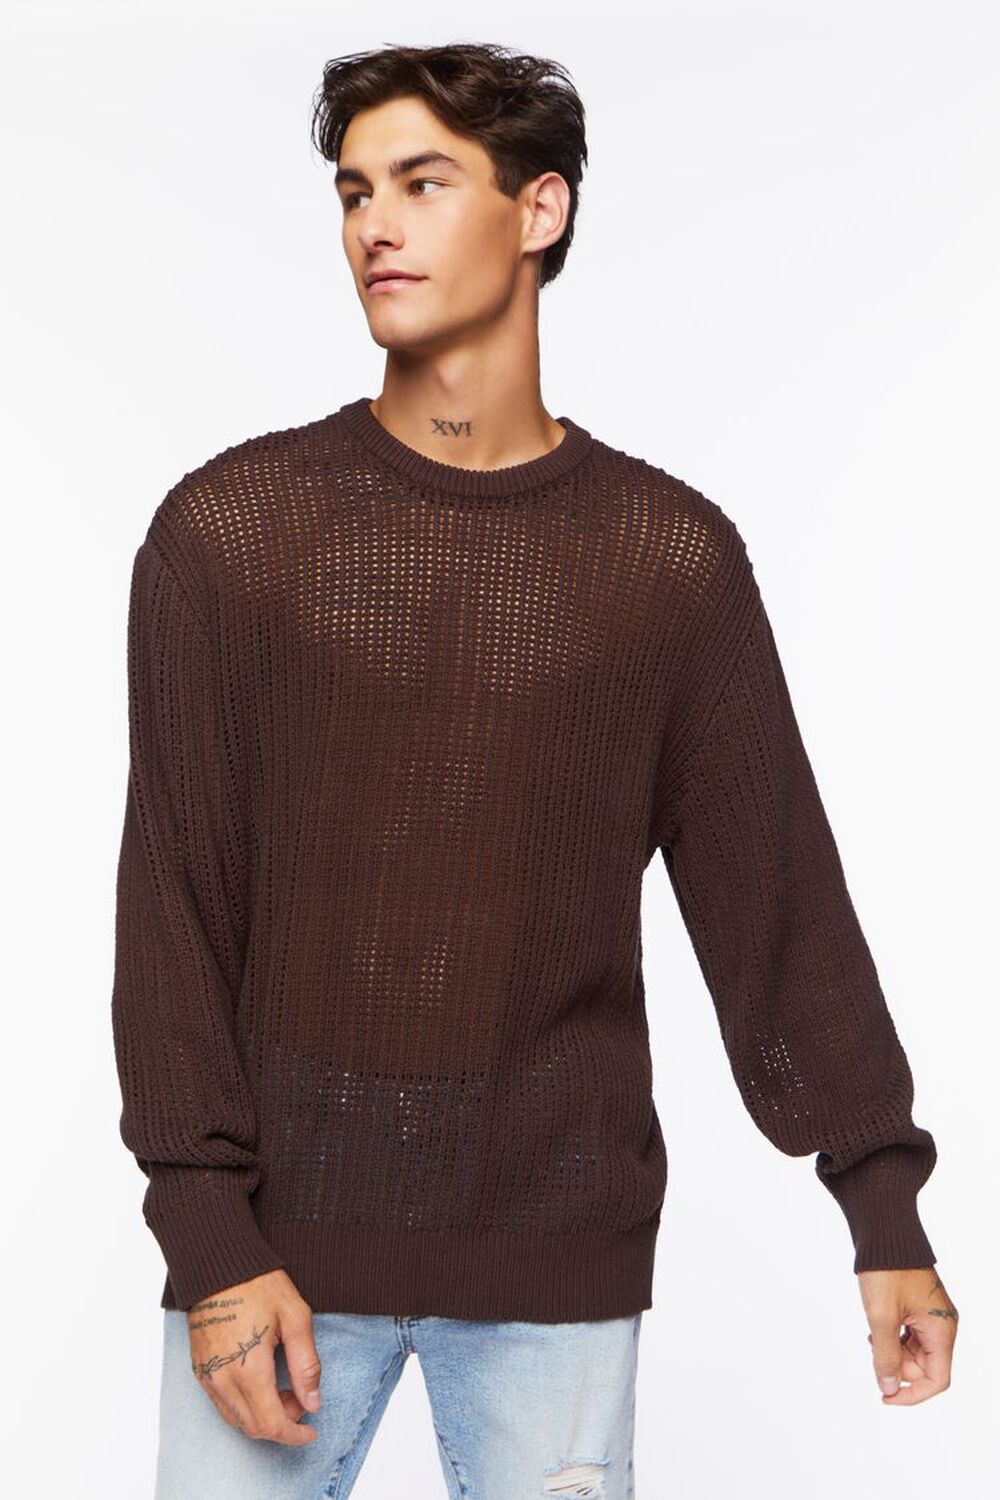 COCOA Open-Knit Crew Sweater, image 1